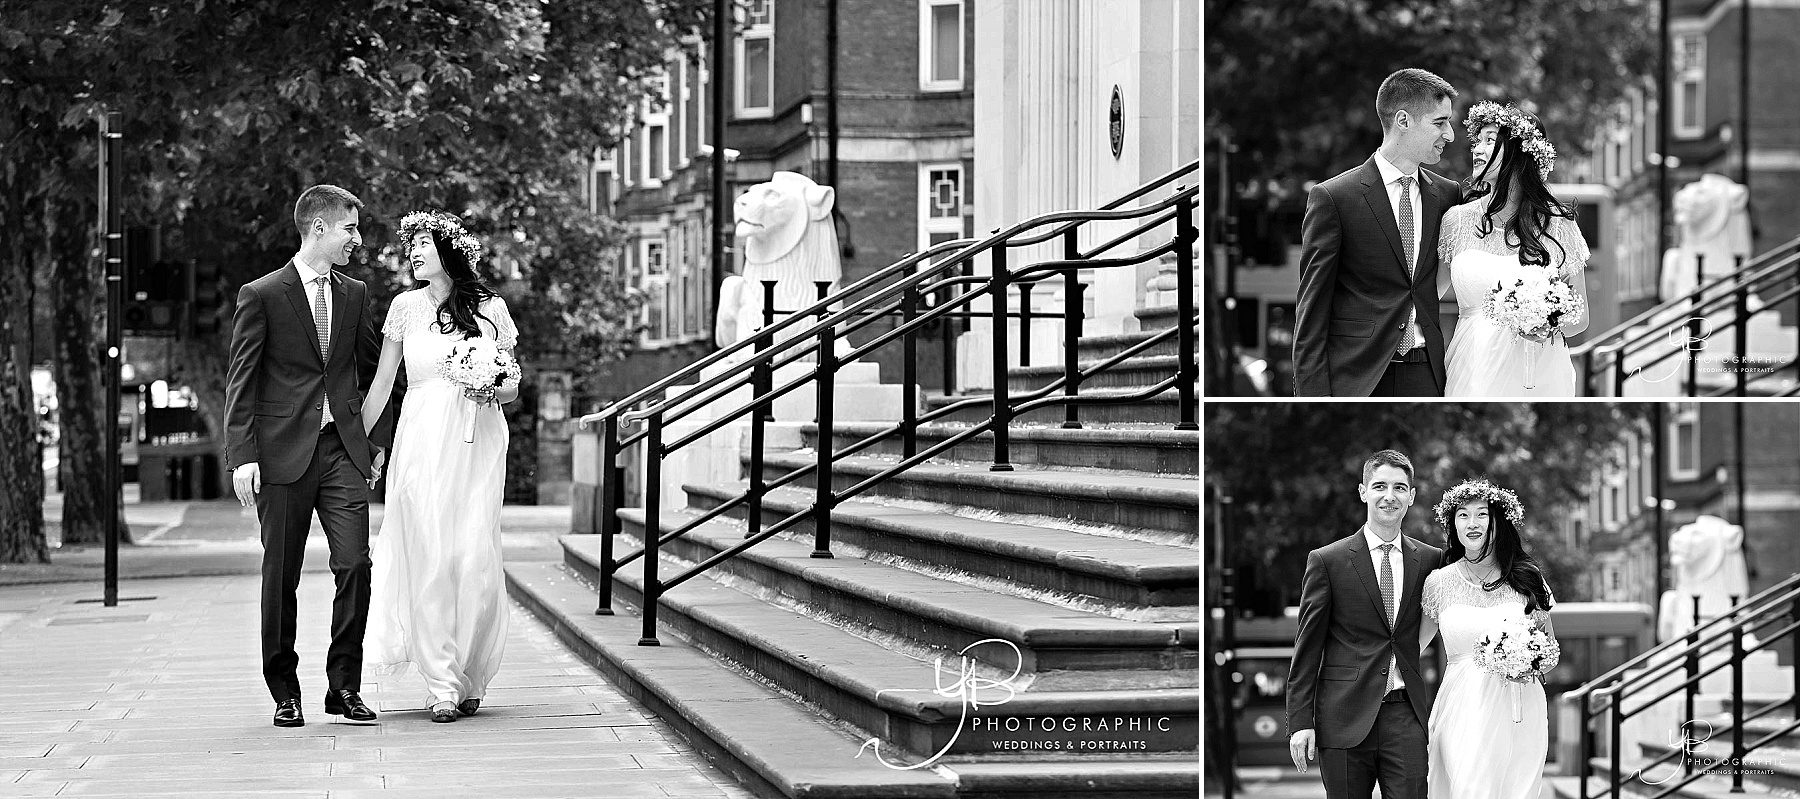 A bride and groom walk along Marylebone Road, after their wedding in the Soho Room.